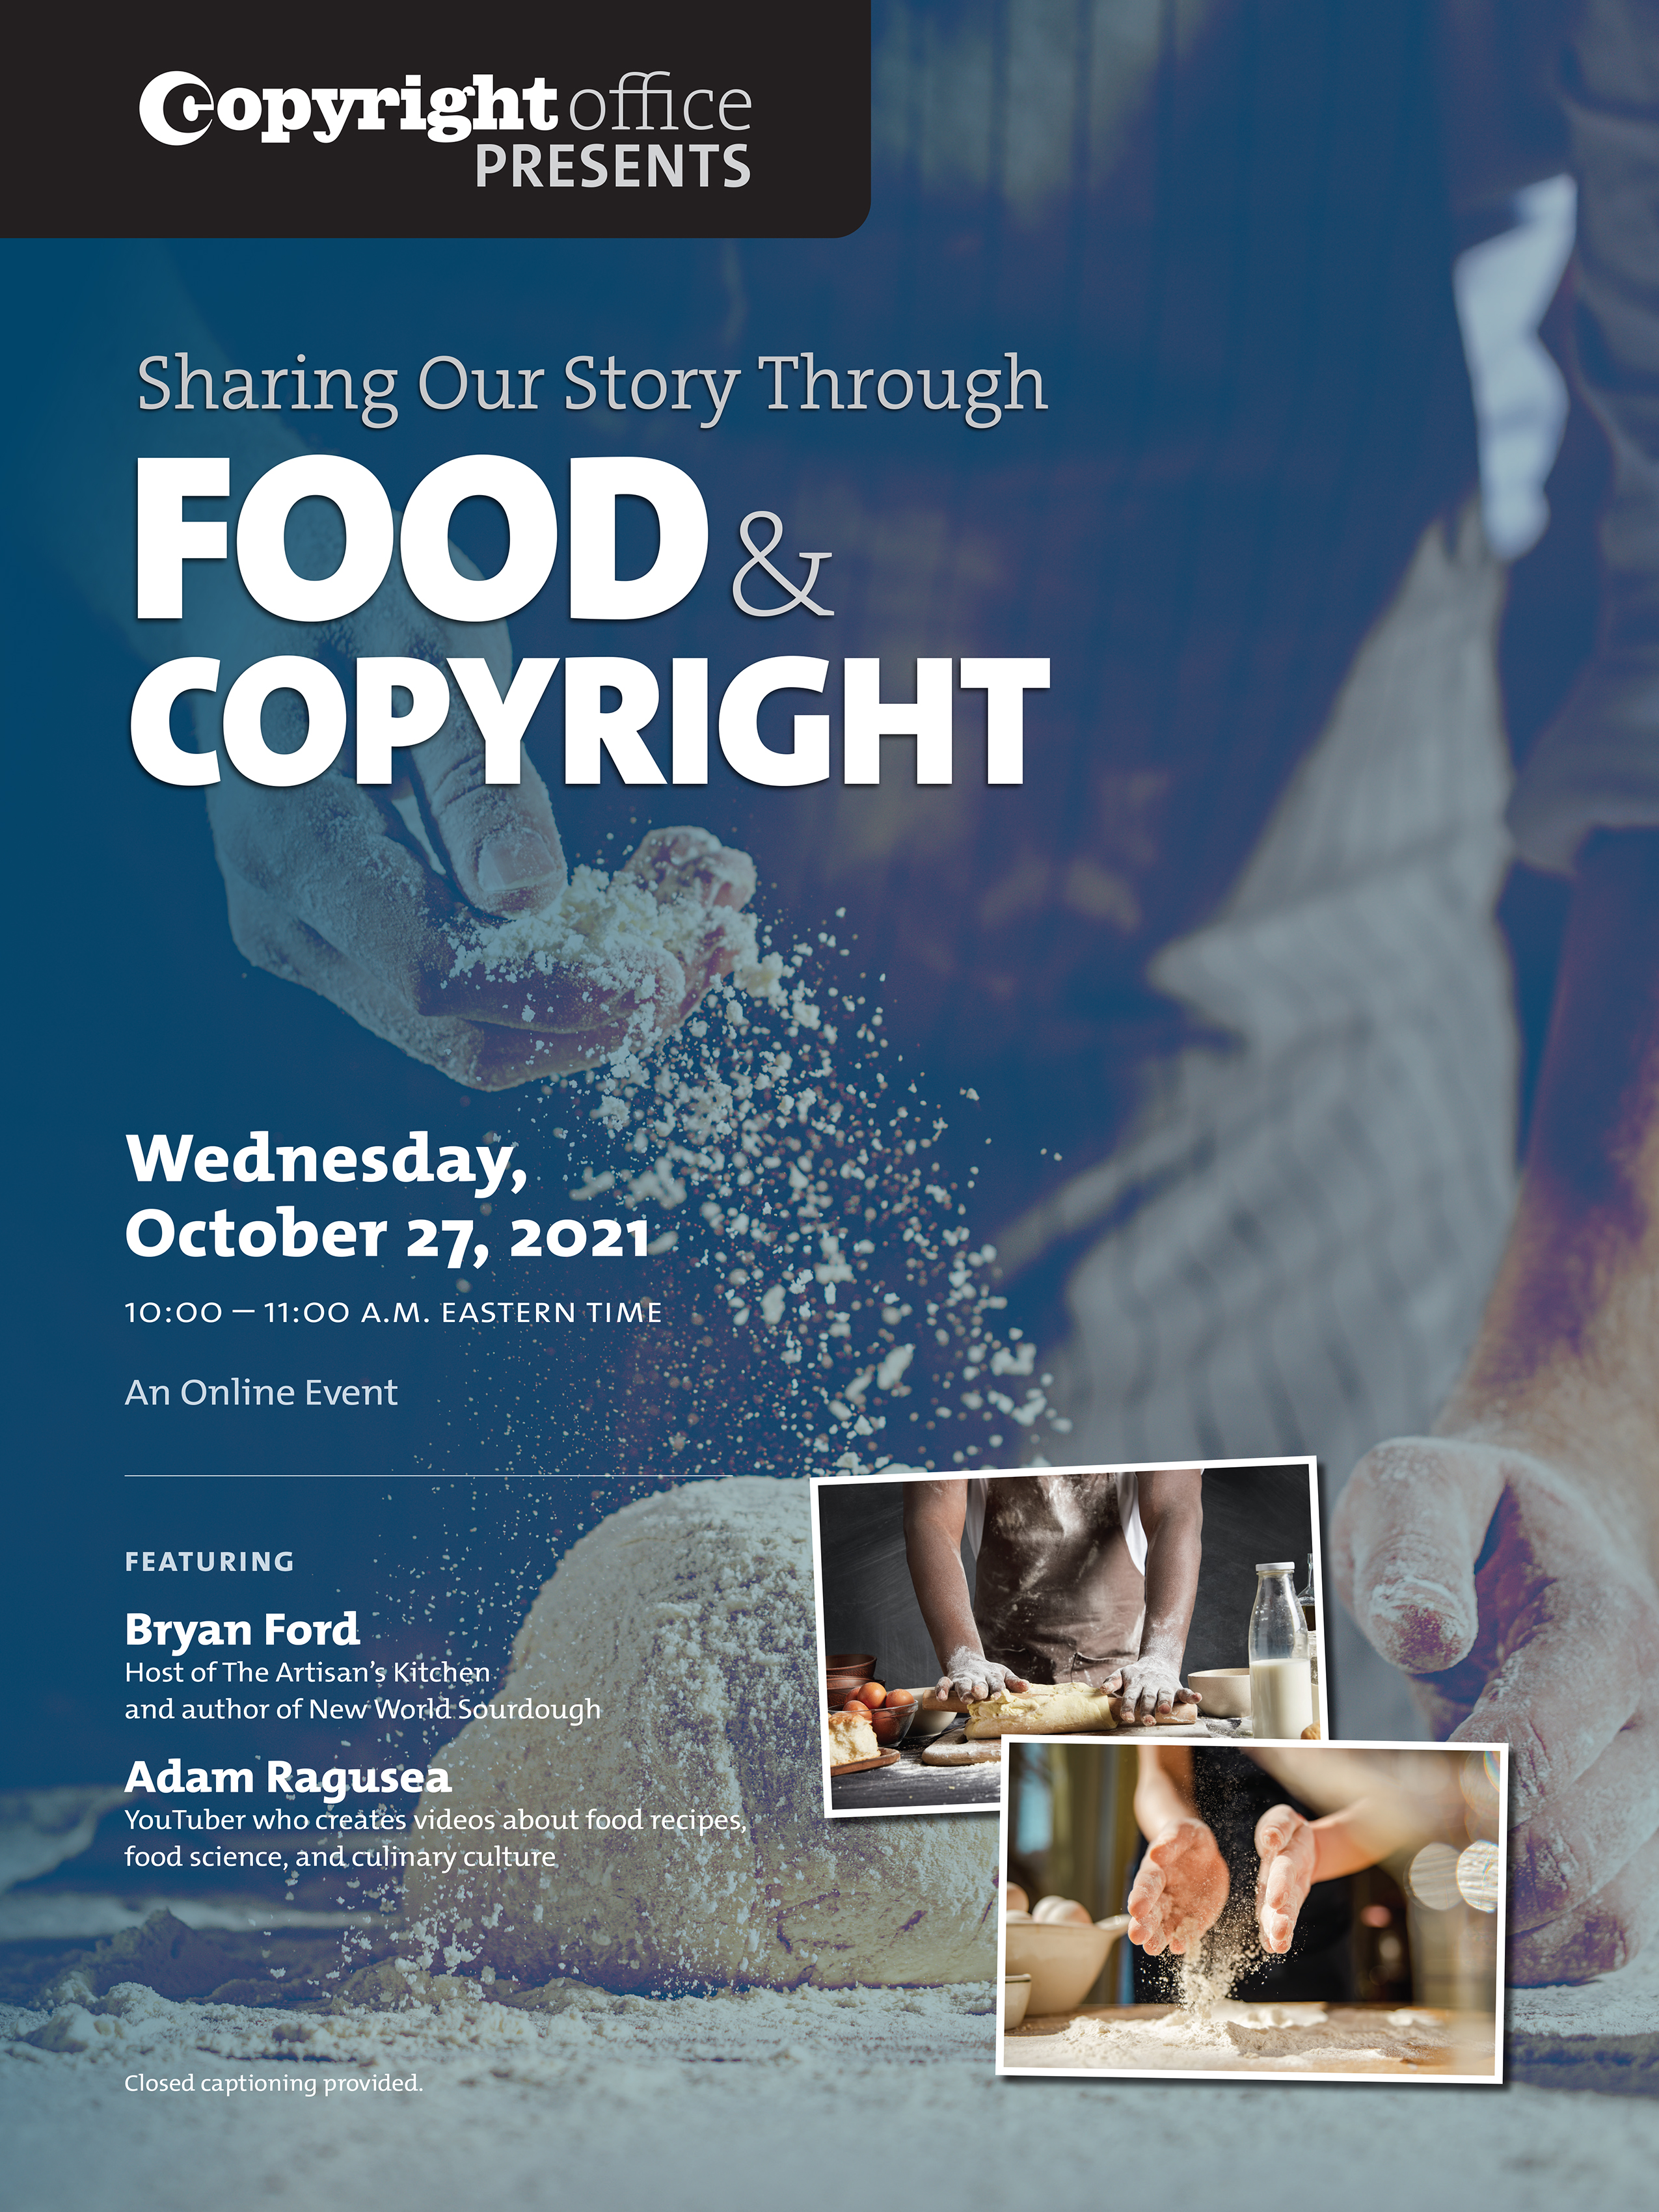 Sharing Our Story Through Food and Copyright. Wednesday, October 27, 2021. 10 A.M. - 11 A.M. ET. An Online Event